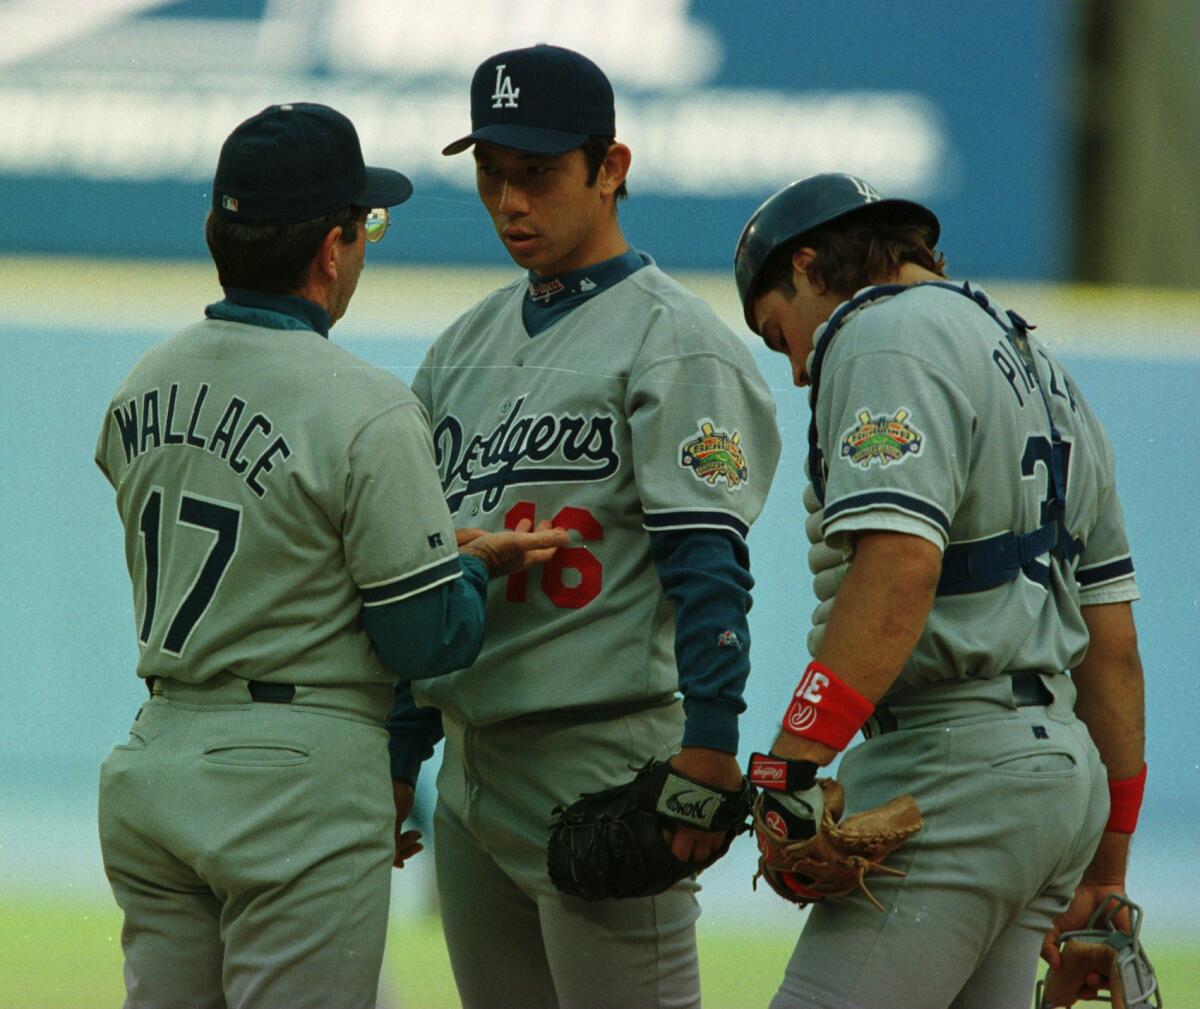 Dodgers pitcher Hideo Nomo speaks to pitching coach David Wallace after giving up a home run to Atlanta's Chipper Jones.